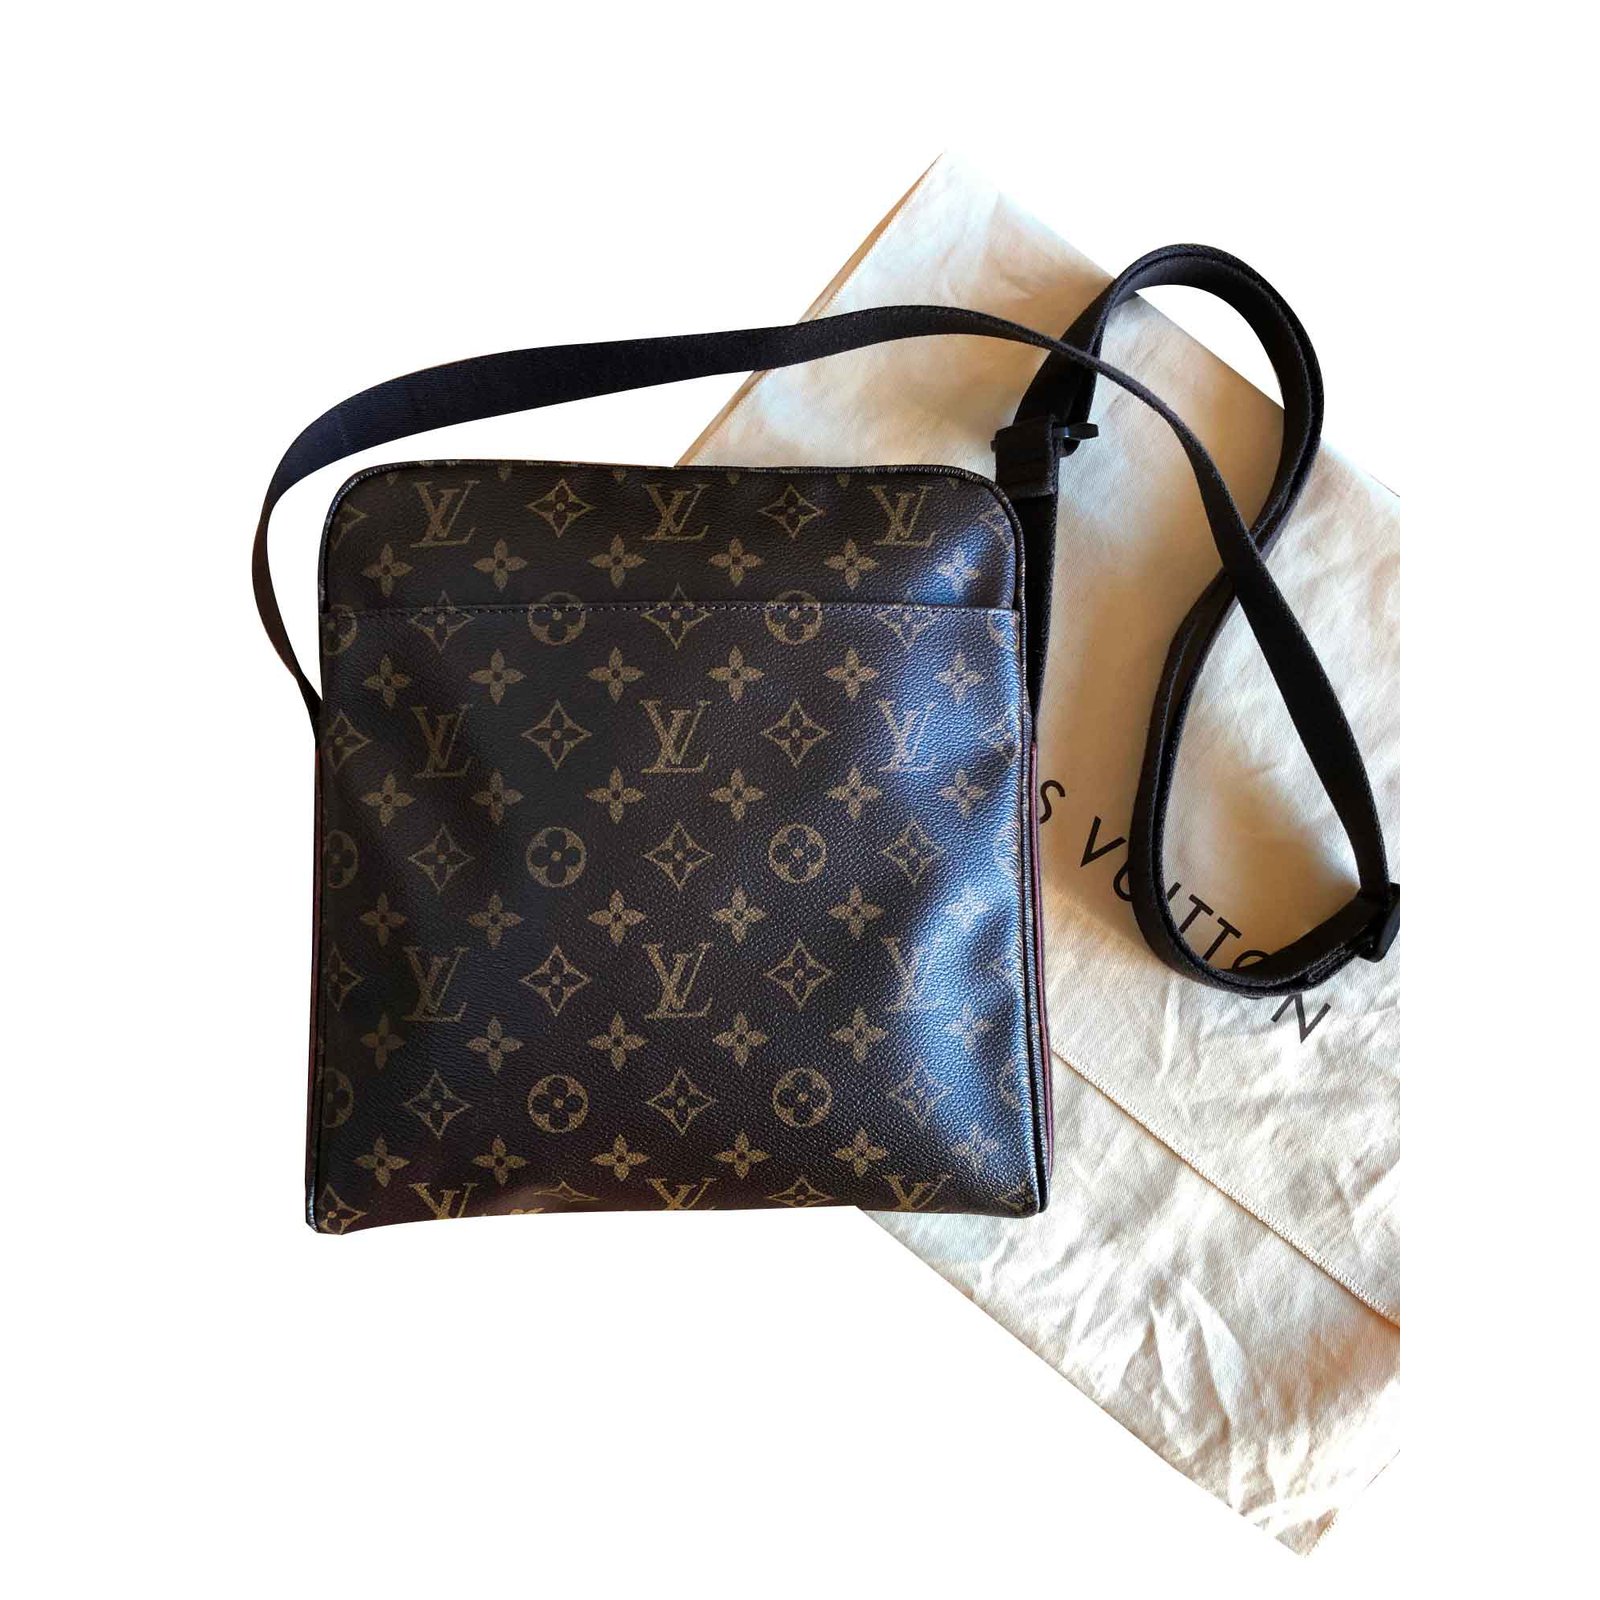 Louis Vuitton Black/Brown Leather And Coated Canvas Beaubourg